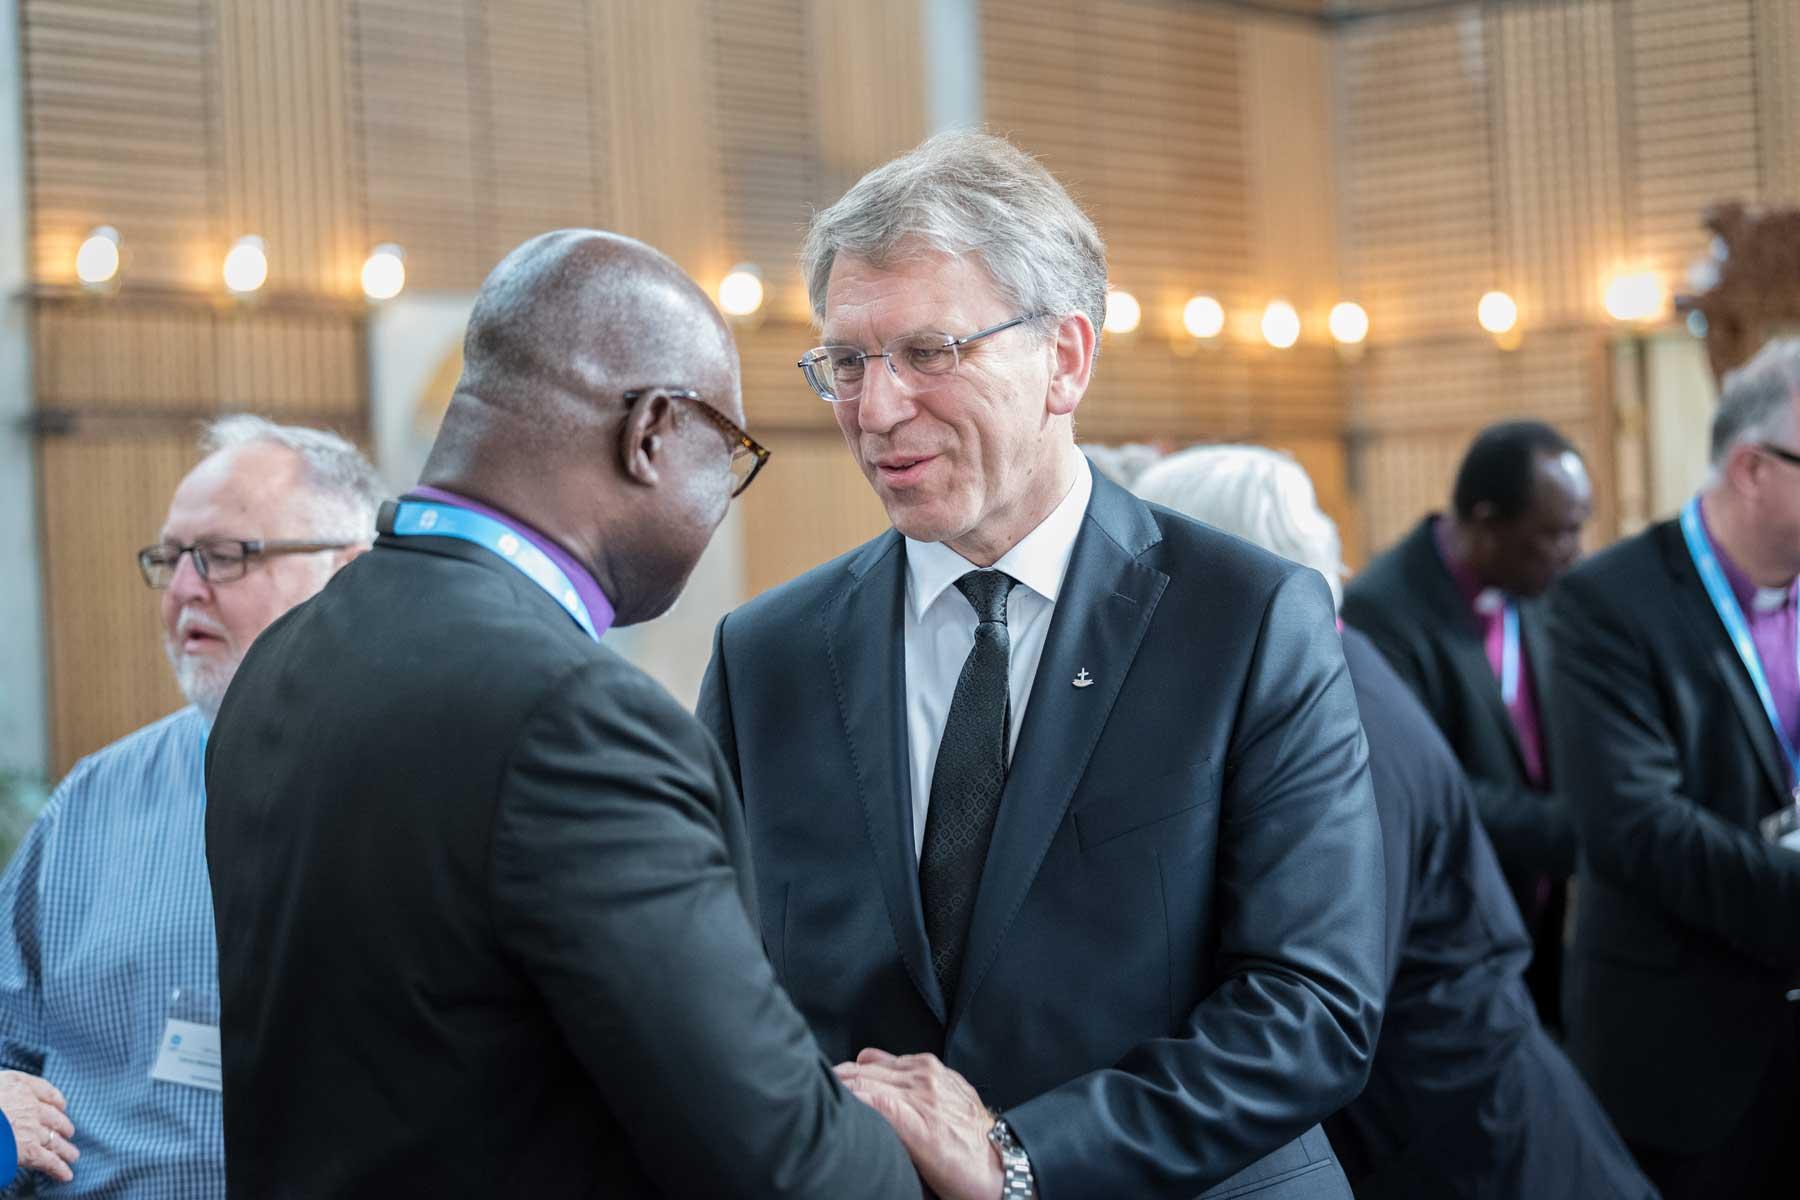 LWF President Musa and WCC General Secretary Tveit meeting at the LWF Council 2018 in Geneva. Photo: LWF/Albin Hillert